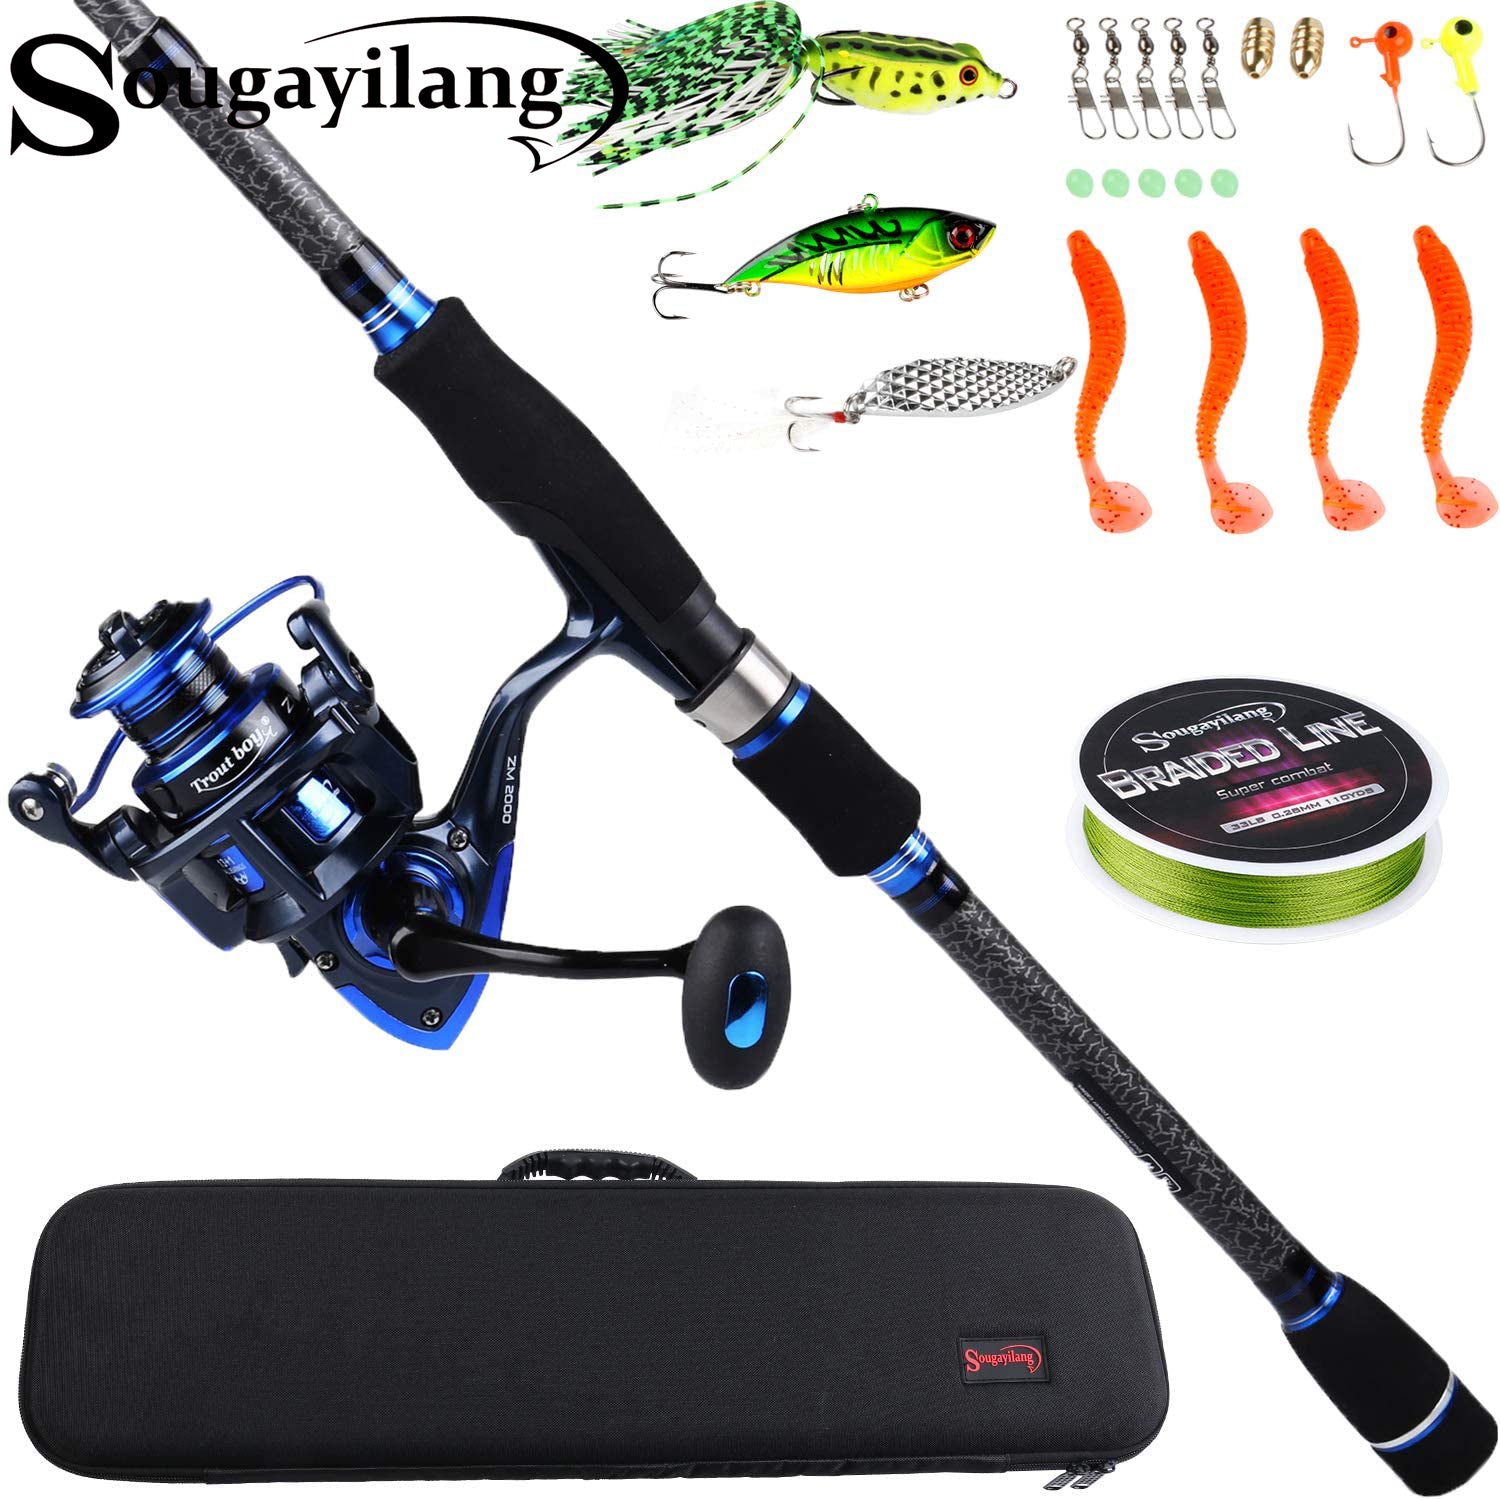 Sougayilang Telescopic Fishing Rod and Reel Combos with Lightweight 24-Ton  Graphite Pole and Spinning reels